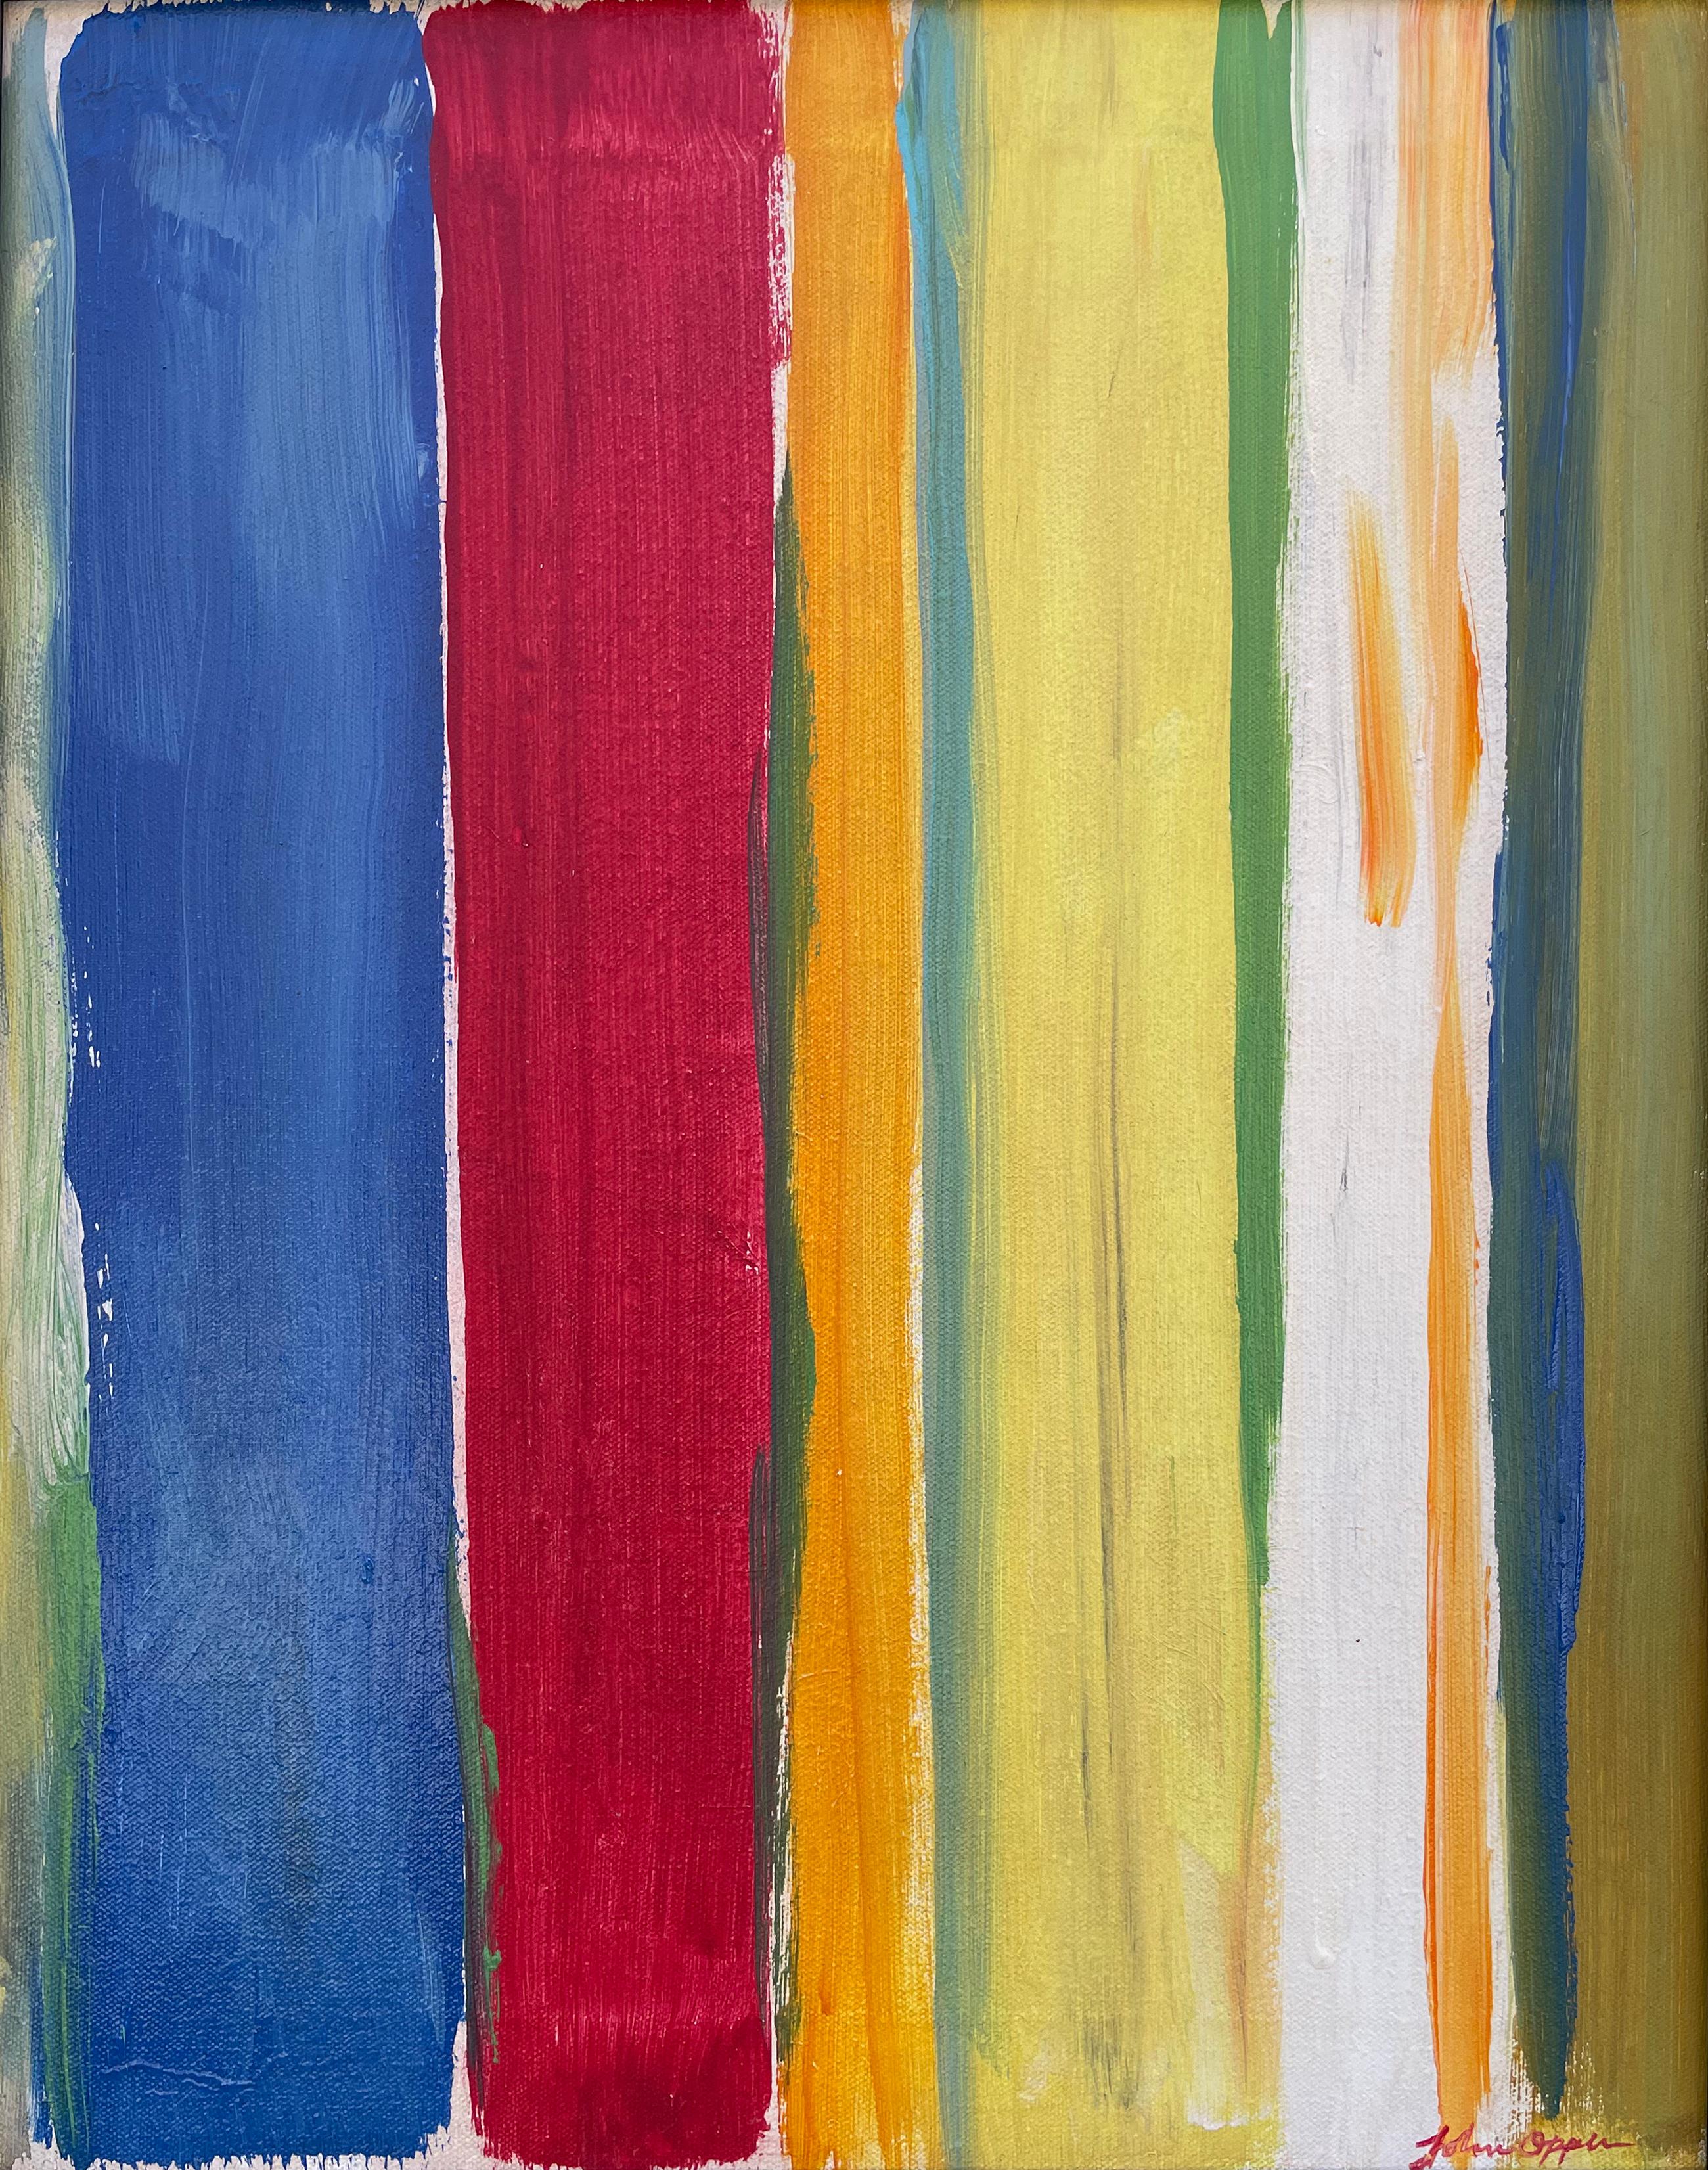 Untitled abstract blue, red & yellow oil painting, New York artist - Painting by John Opper